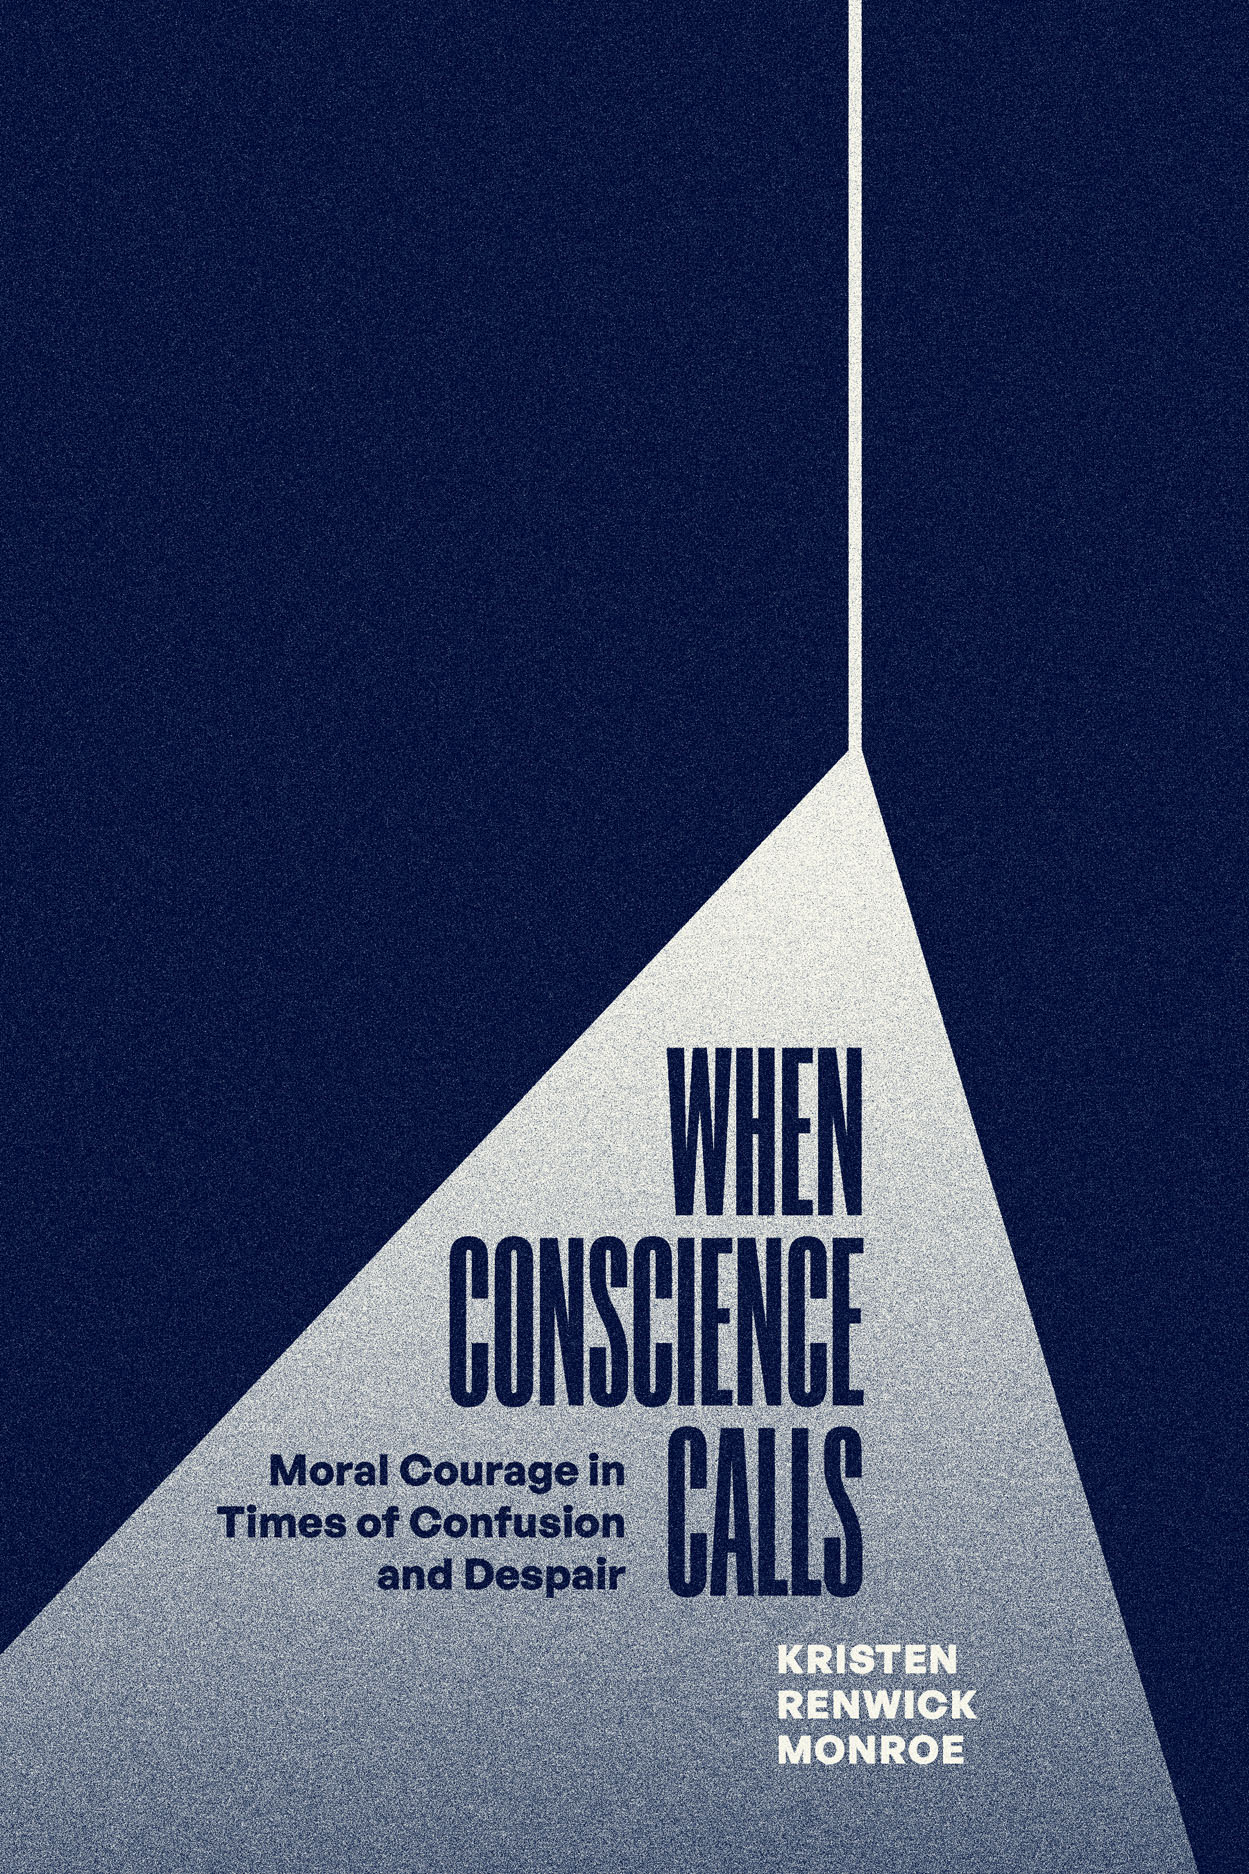 When Conscience Calls: Moral Courage in Times of Confusion and